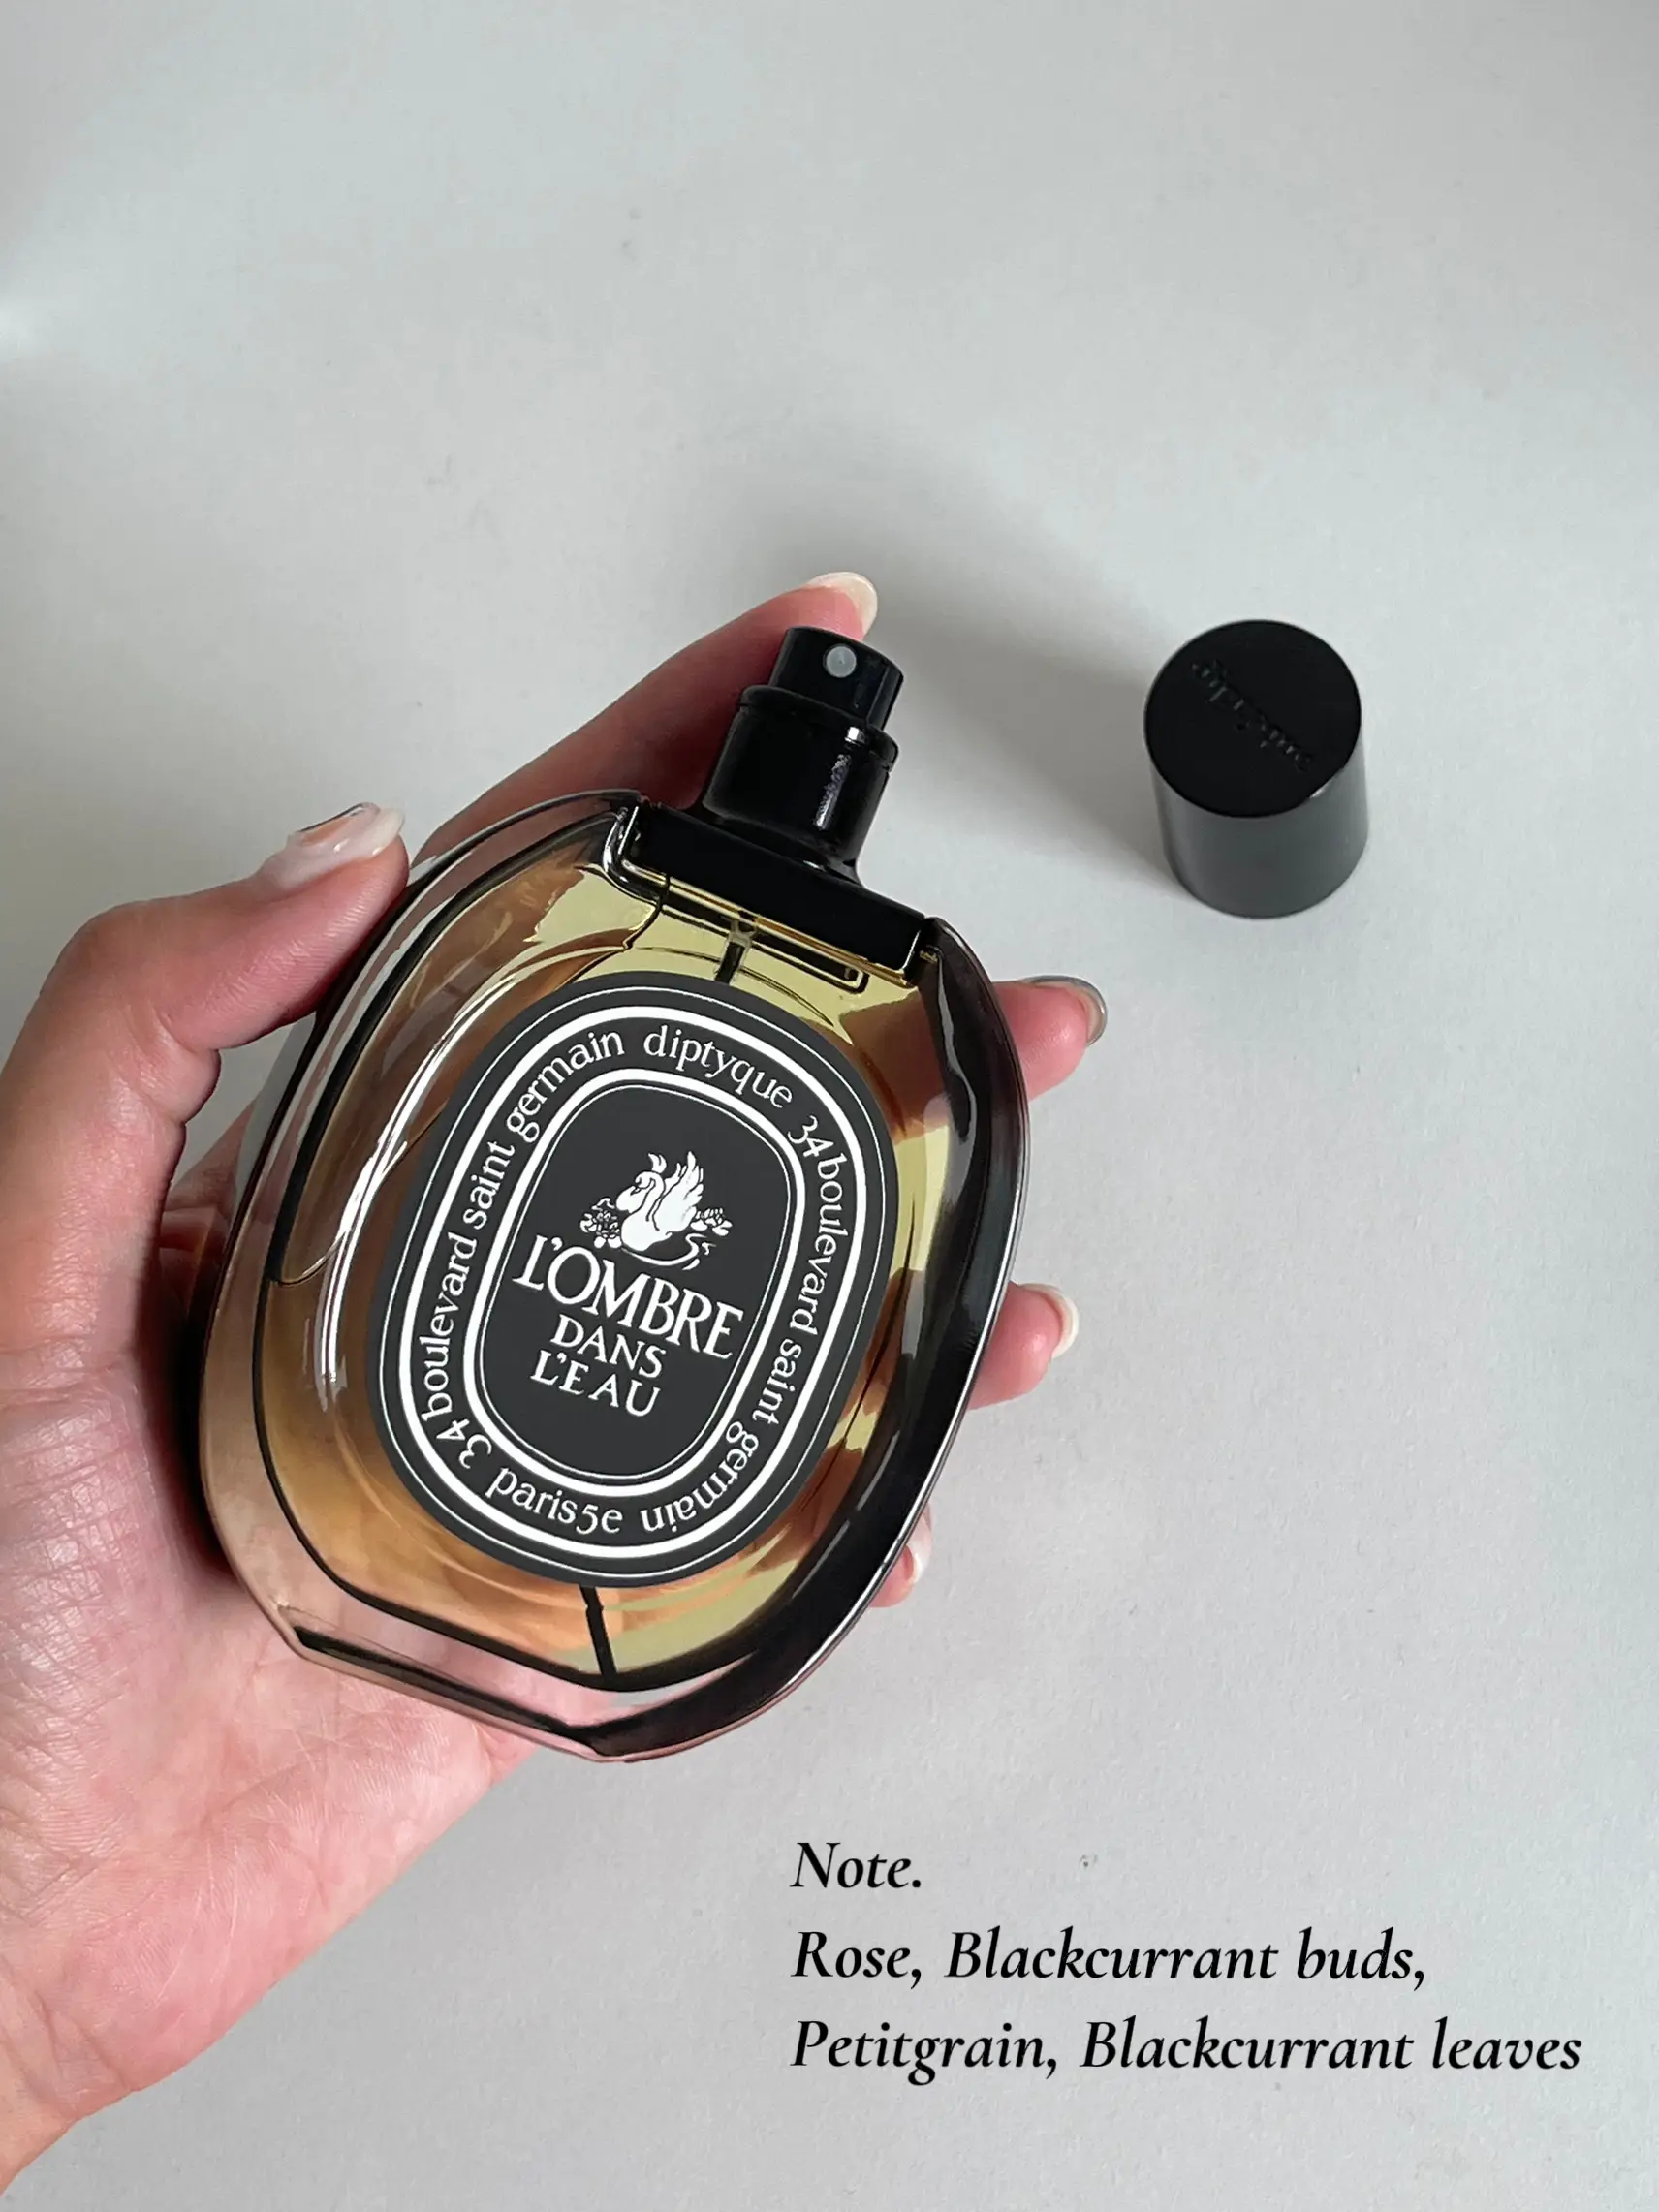 Review; Diptyque perfume, fresh smell. Like in the middle of a